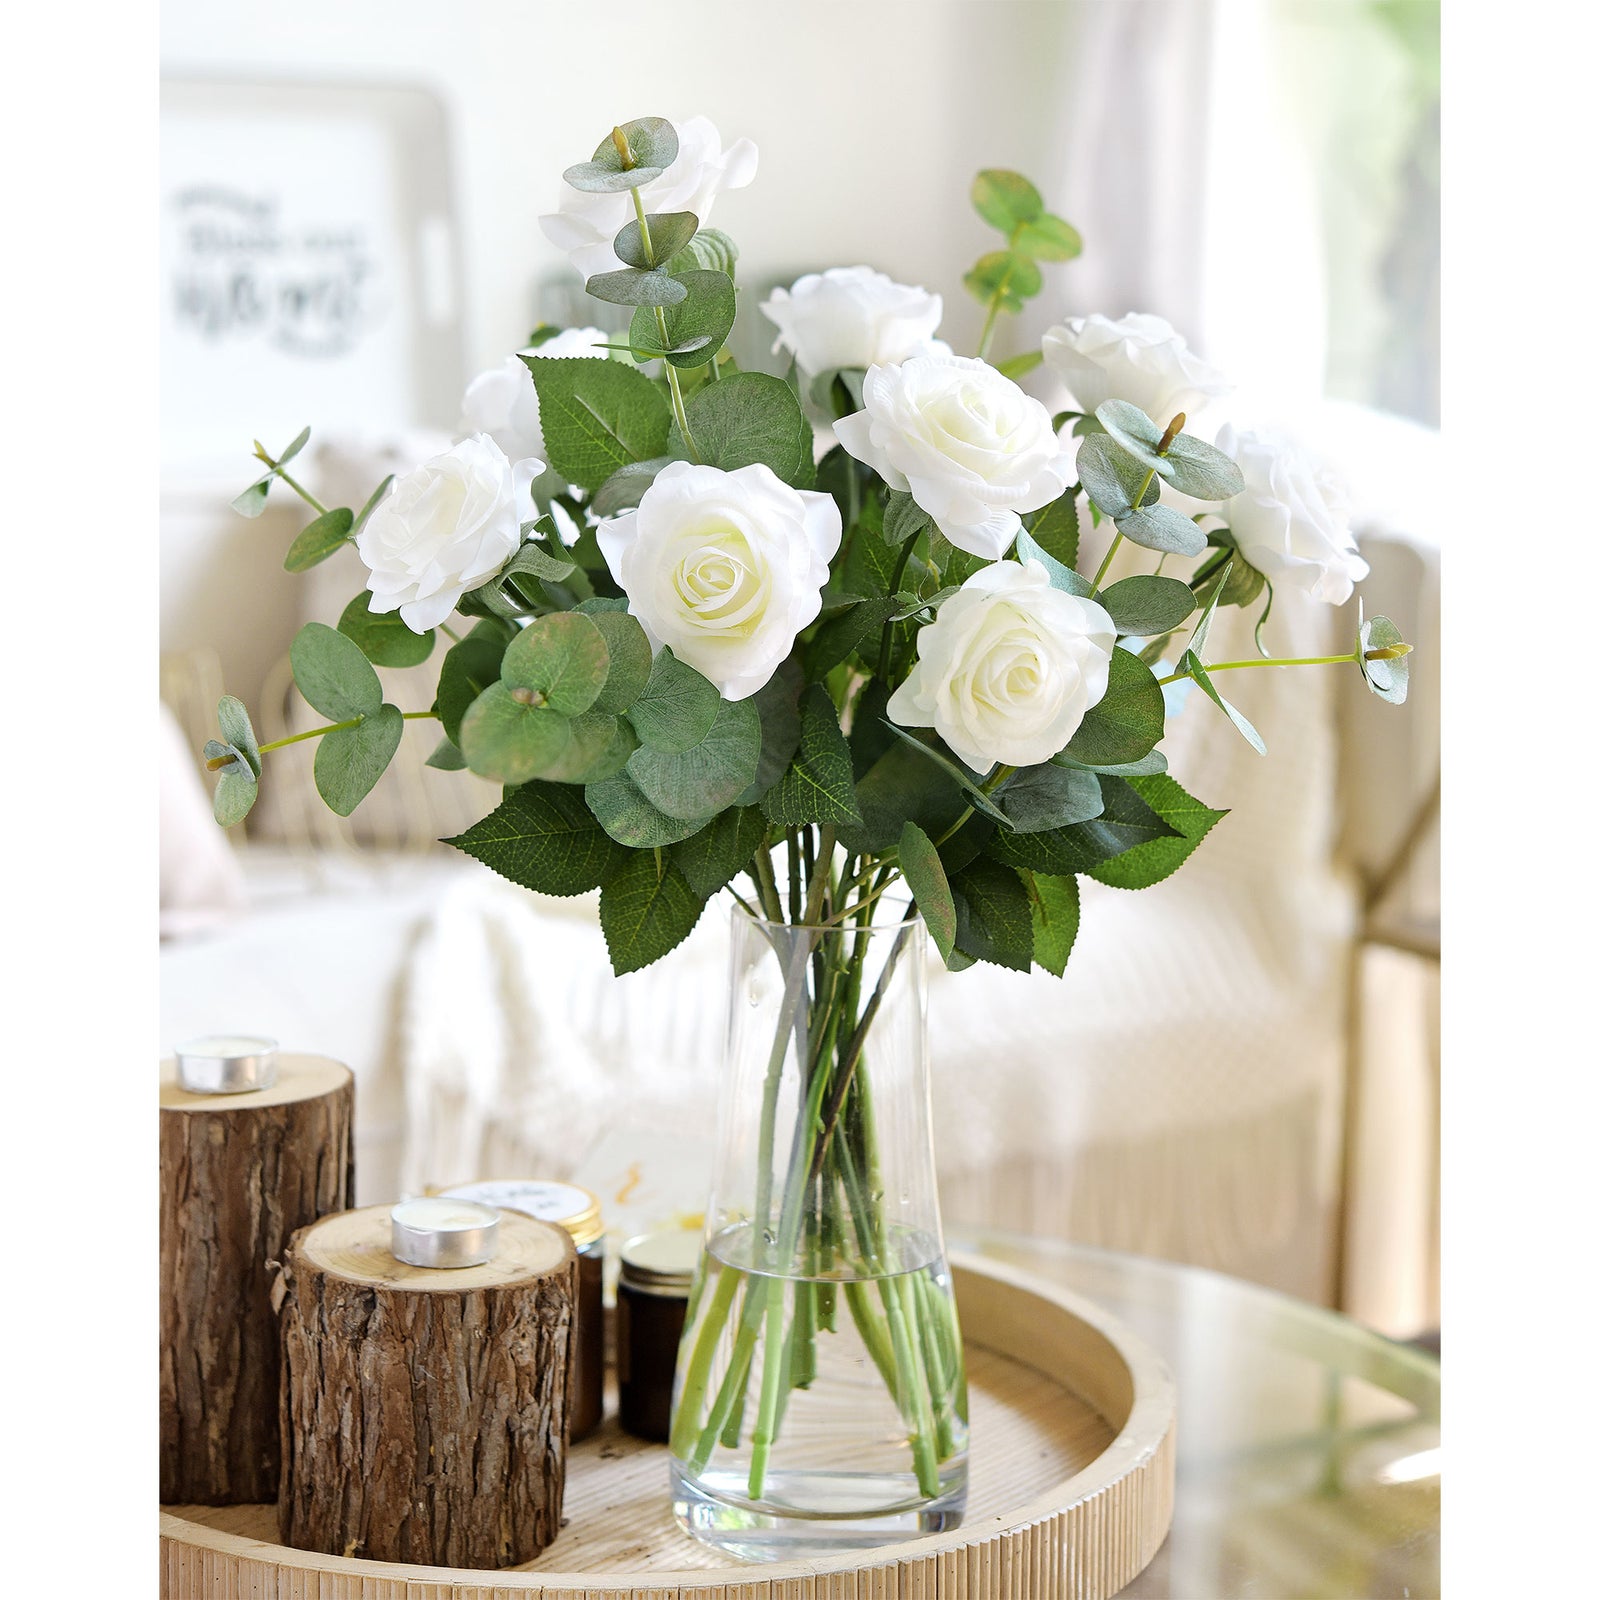 White Roses with Eucalyptus Leaves Bouquet Artificial Flowers